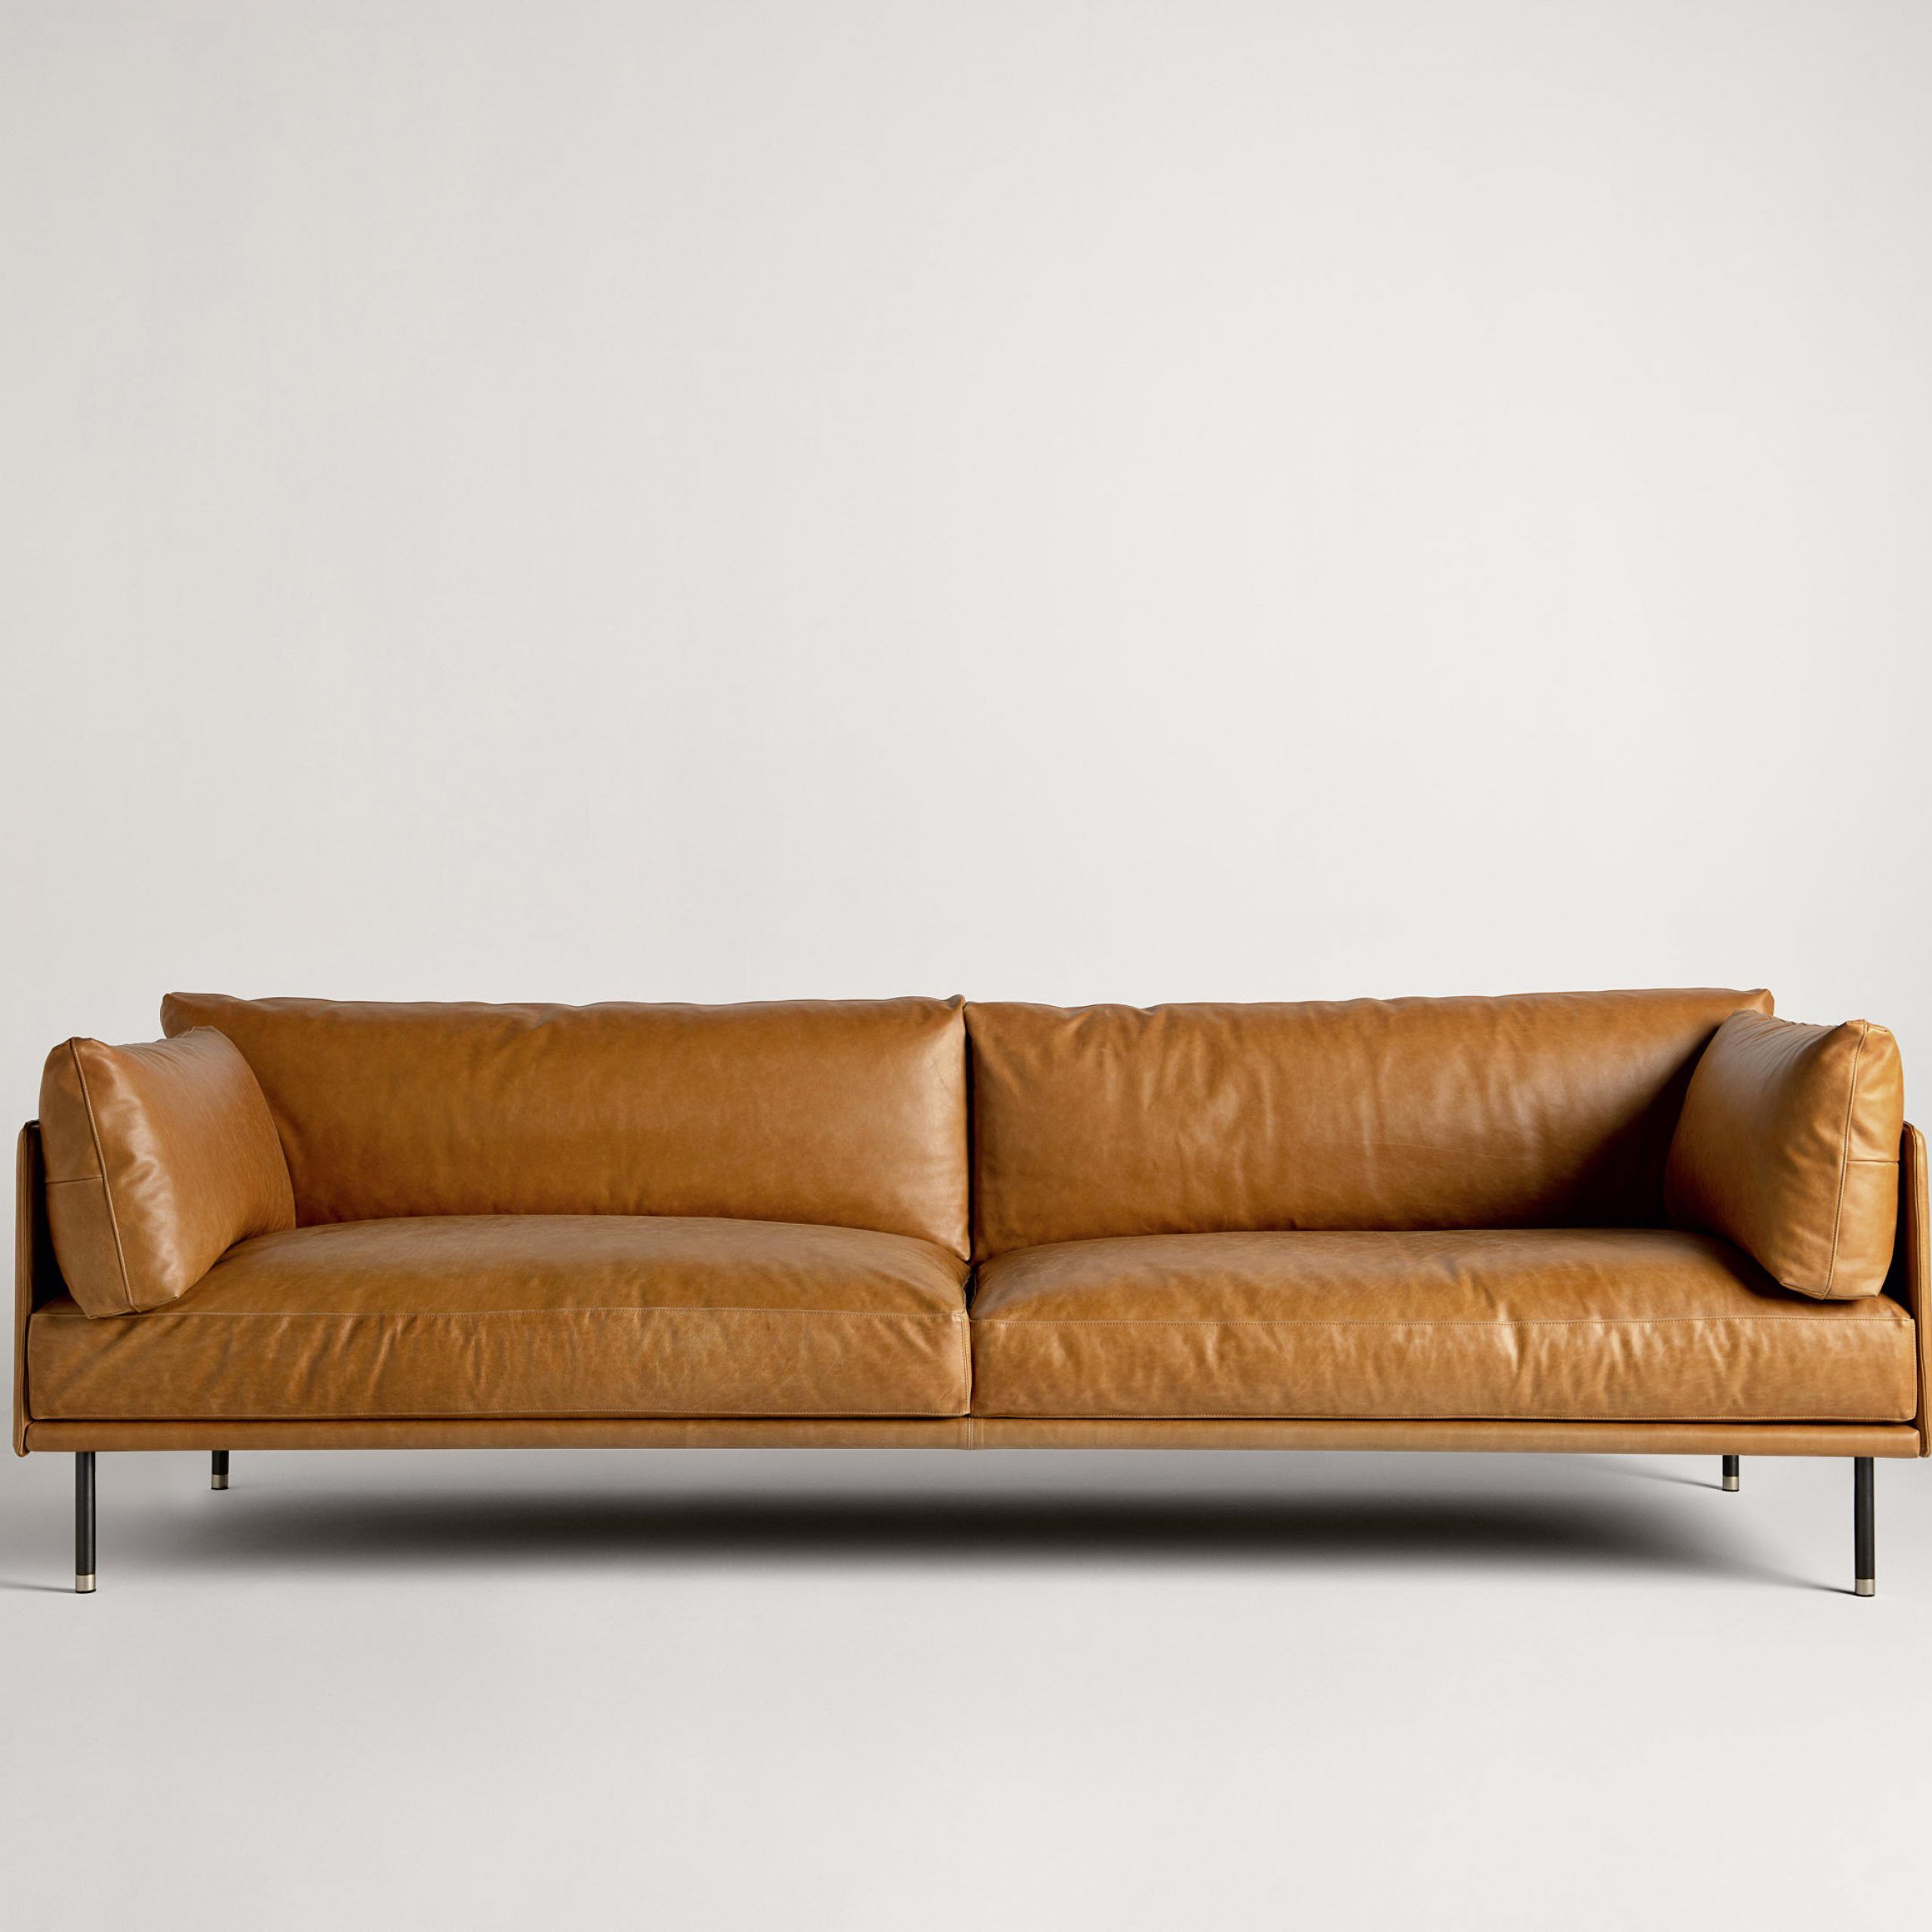 Wilton | Sofa – Sofas From Frag | Architonic In Wilton Fabric Sectional Sofas (View 10 of 15)